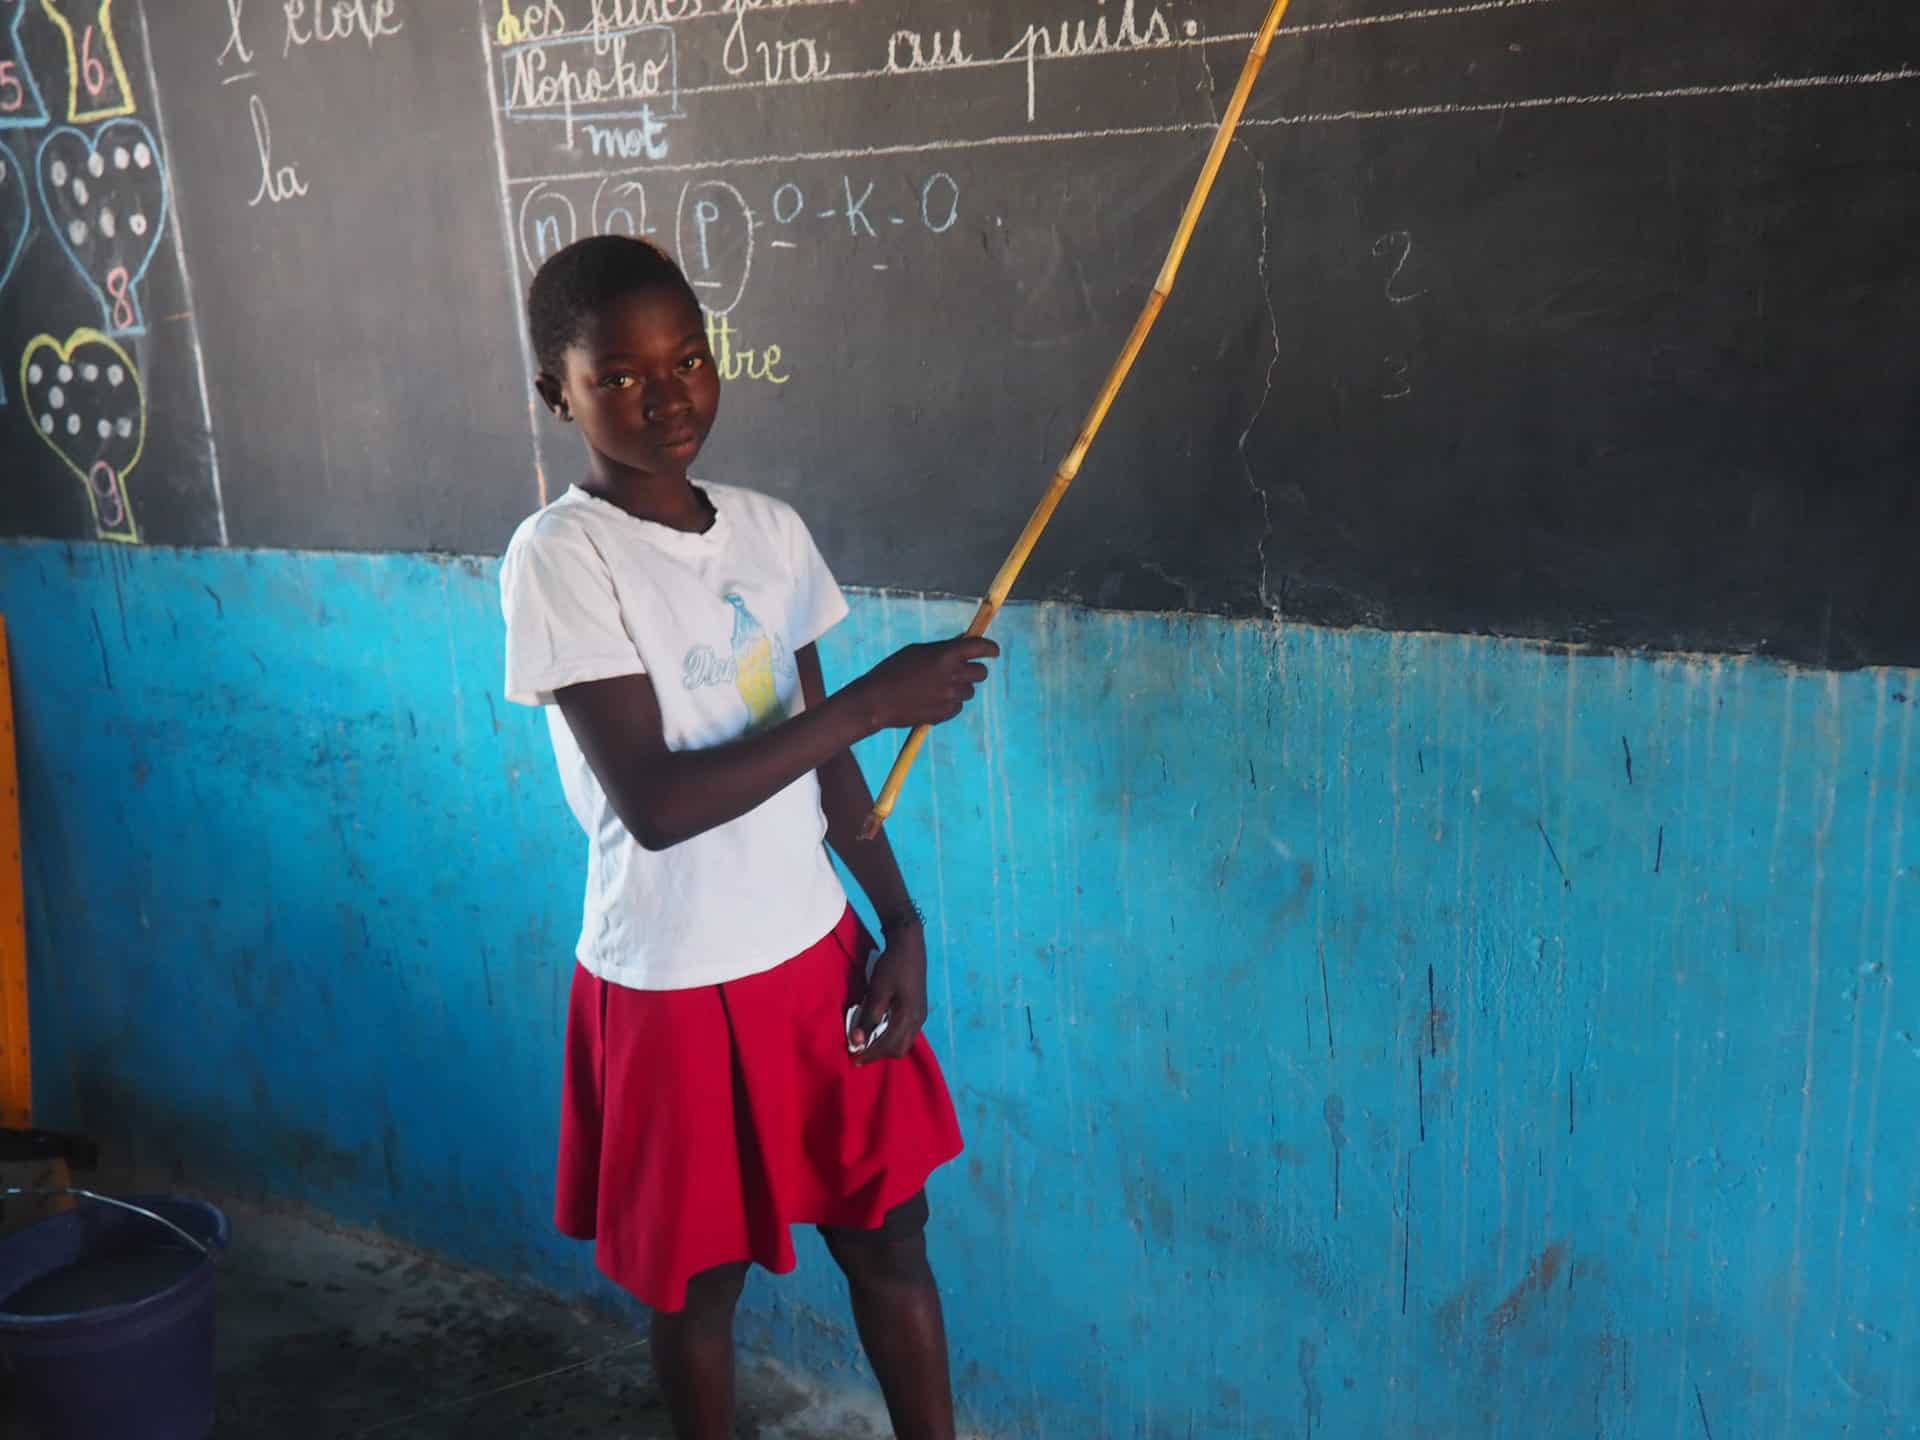 Somda Ester, a pupil from the SSAP centre in the commune of Bozo during a reading session in class, as part of the SCOLFILLE project. Burkina Faso, February 2022. Dramane Sessouma